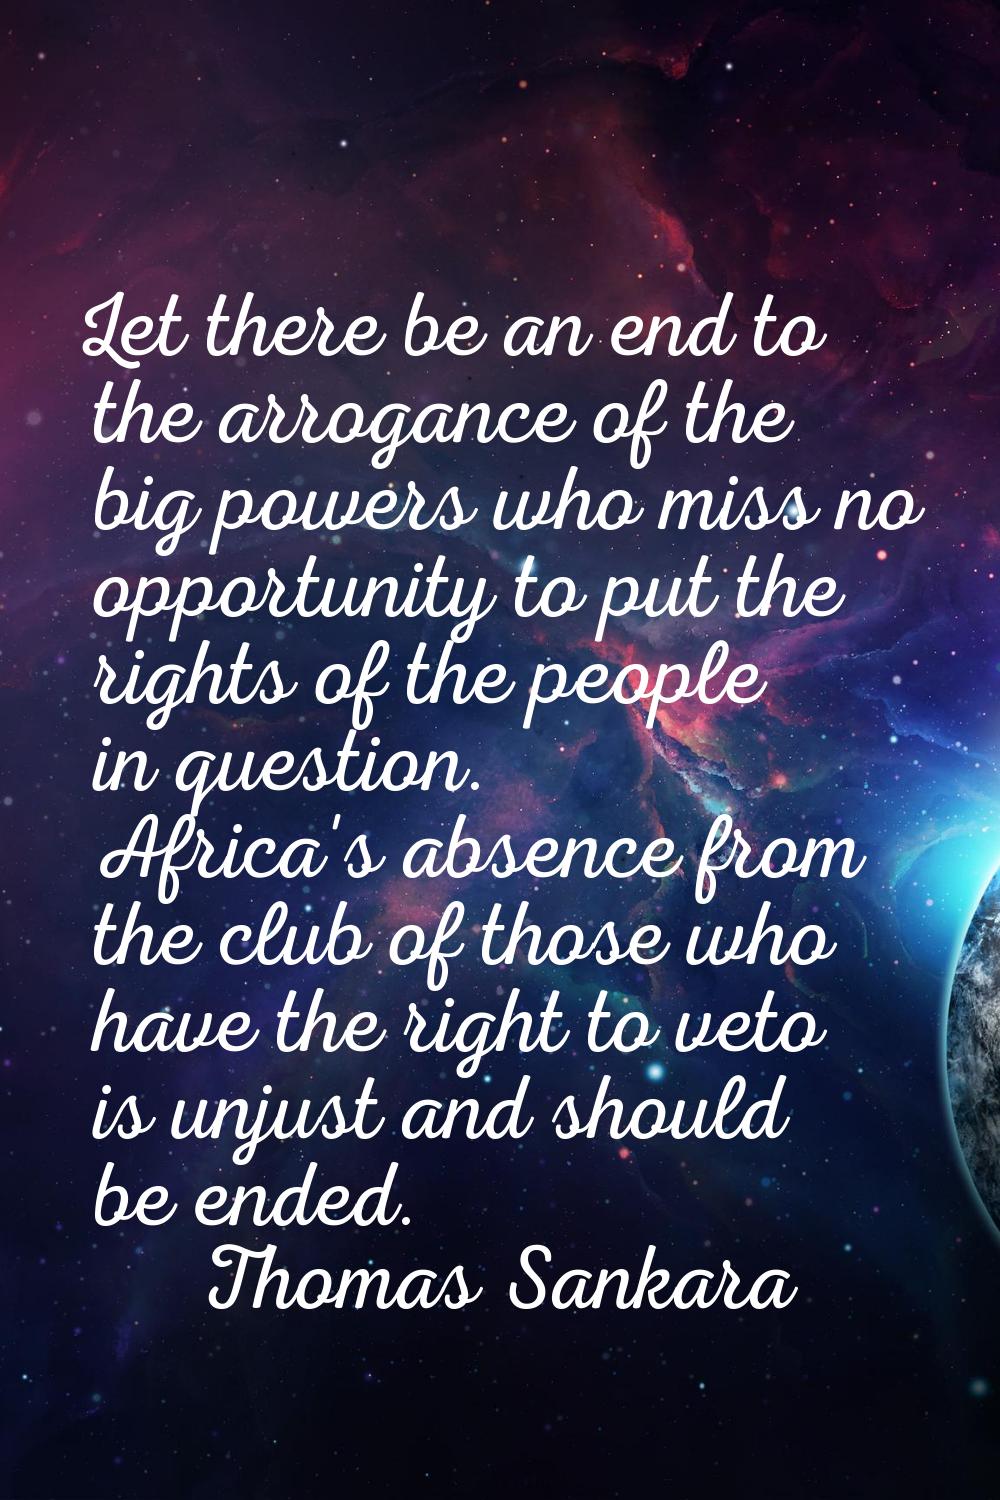 Let there be an end to the arrogance of the big powers who miss no opportunity to put the rights of